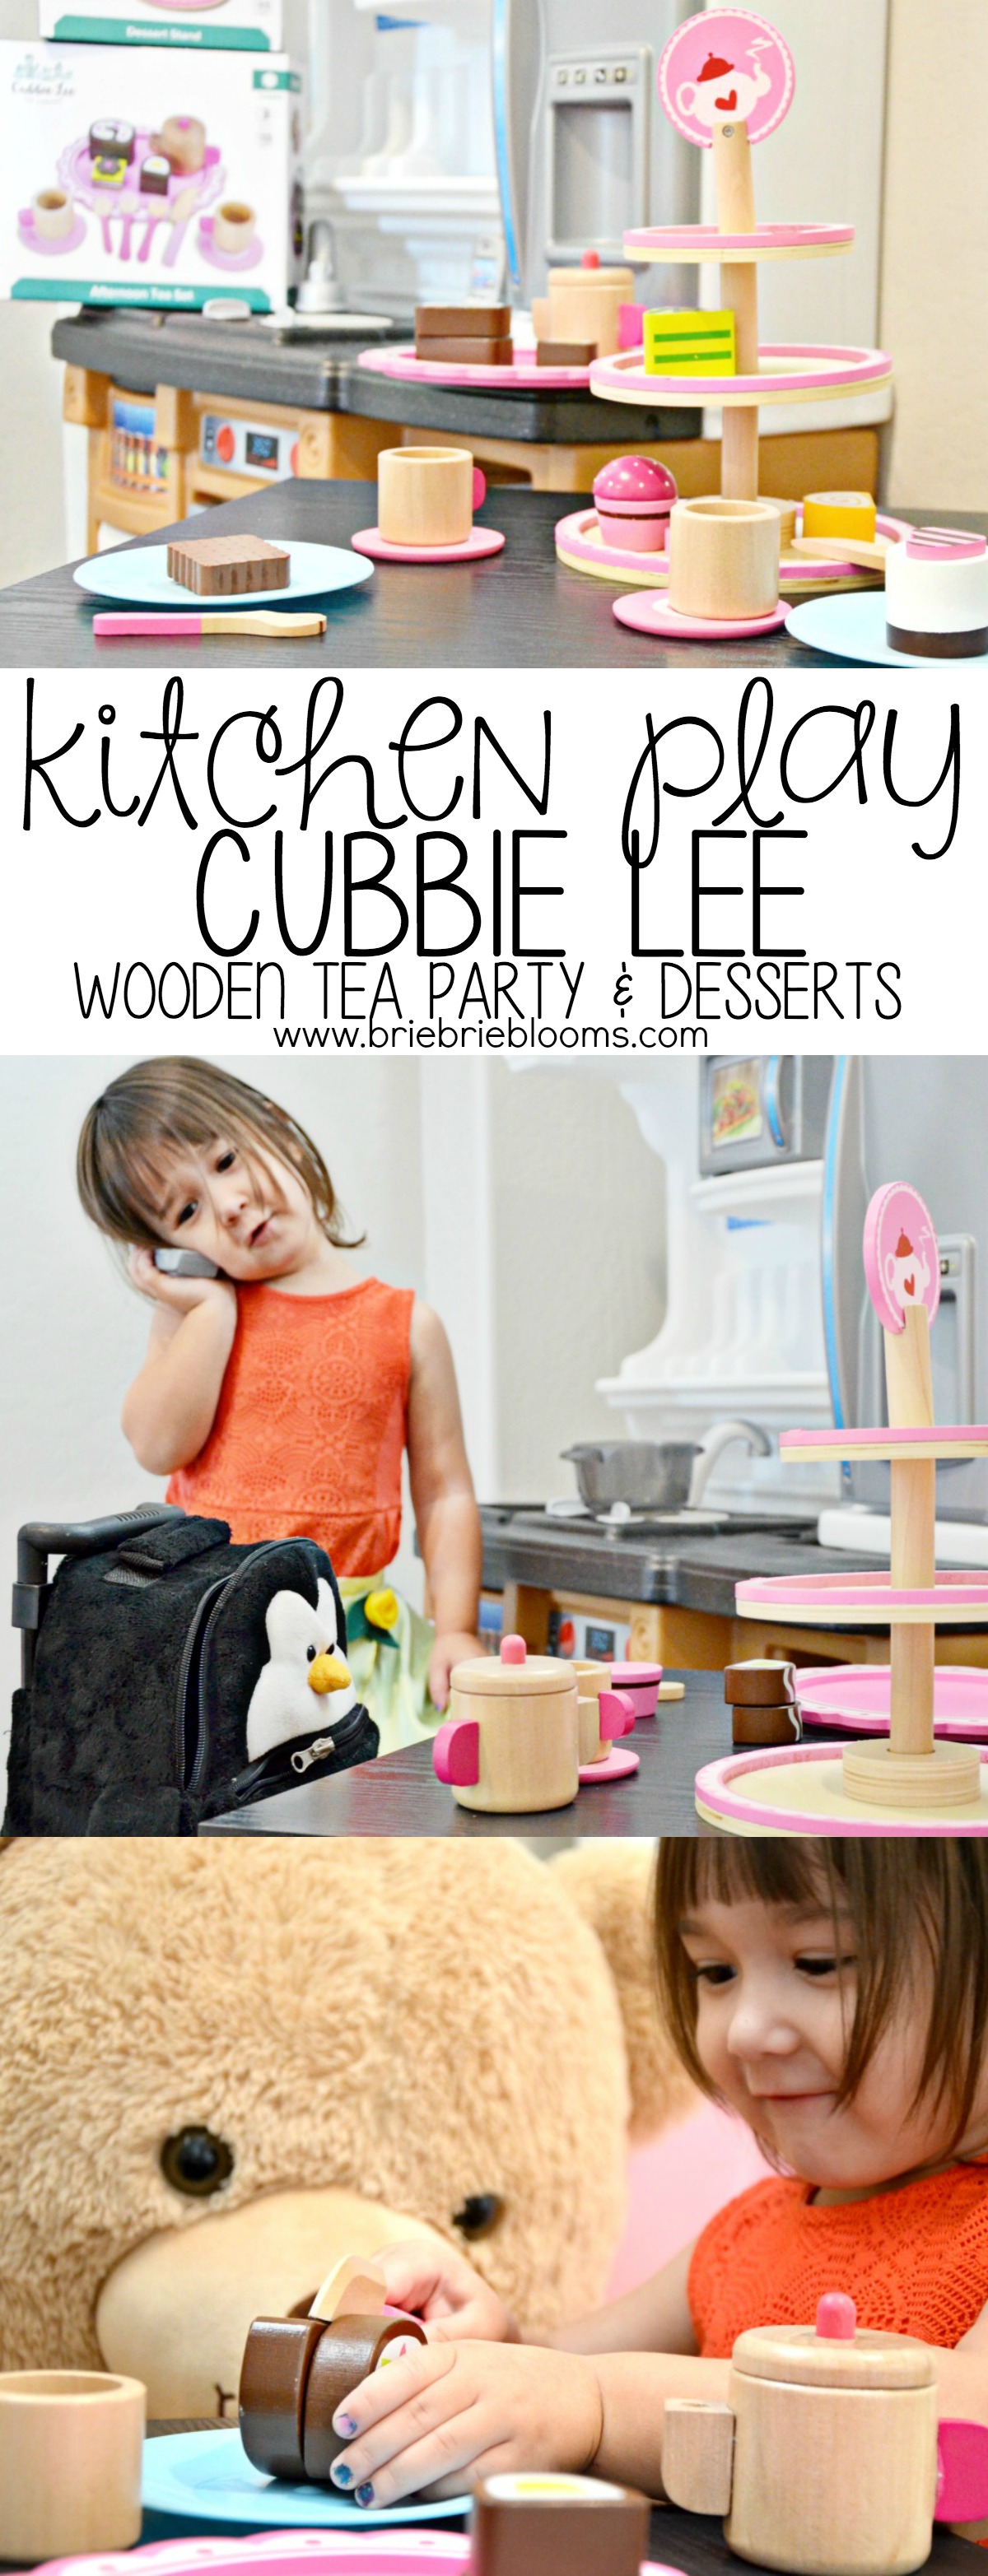 The Cubbie Lee wooden tea party and desserts set is designed for endless play but also helps develop fine motor skills and teaches sharing. 